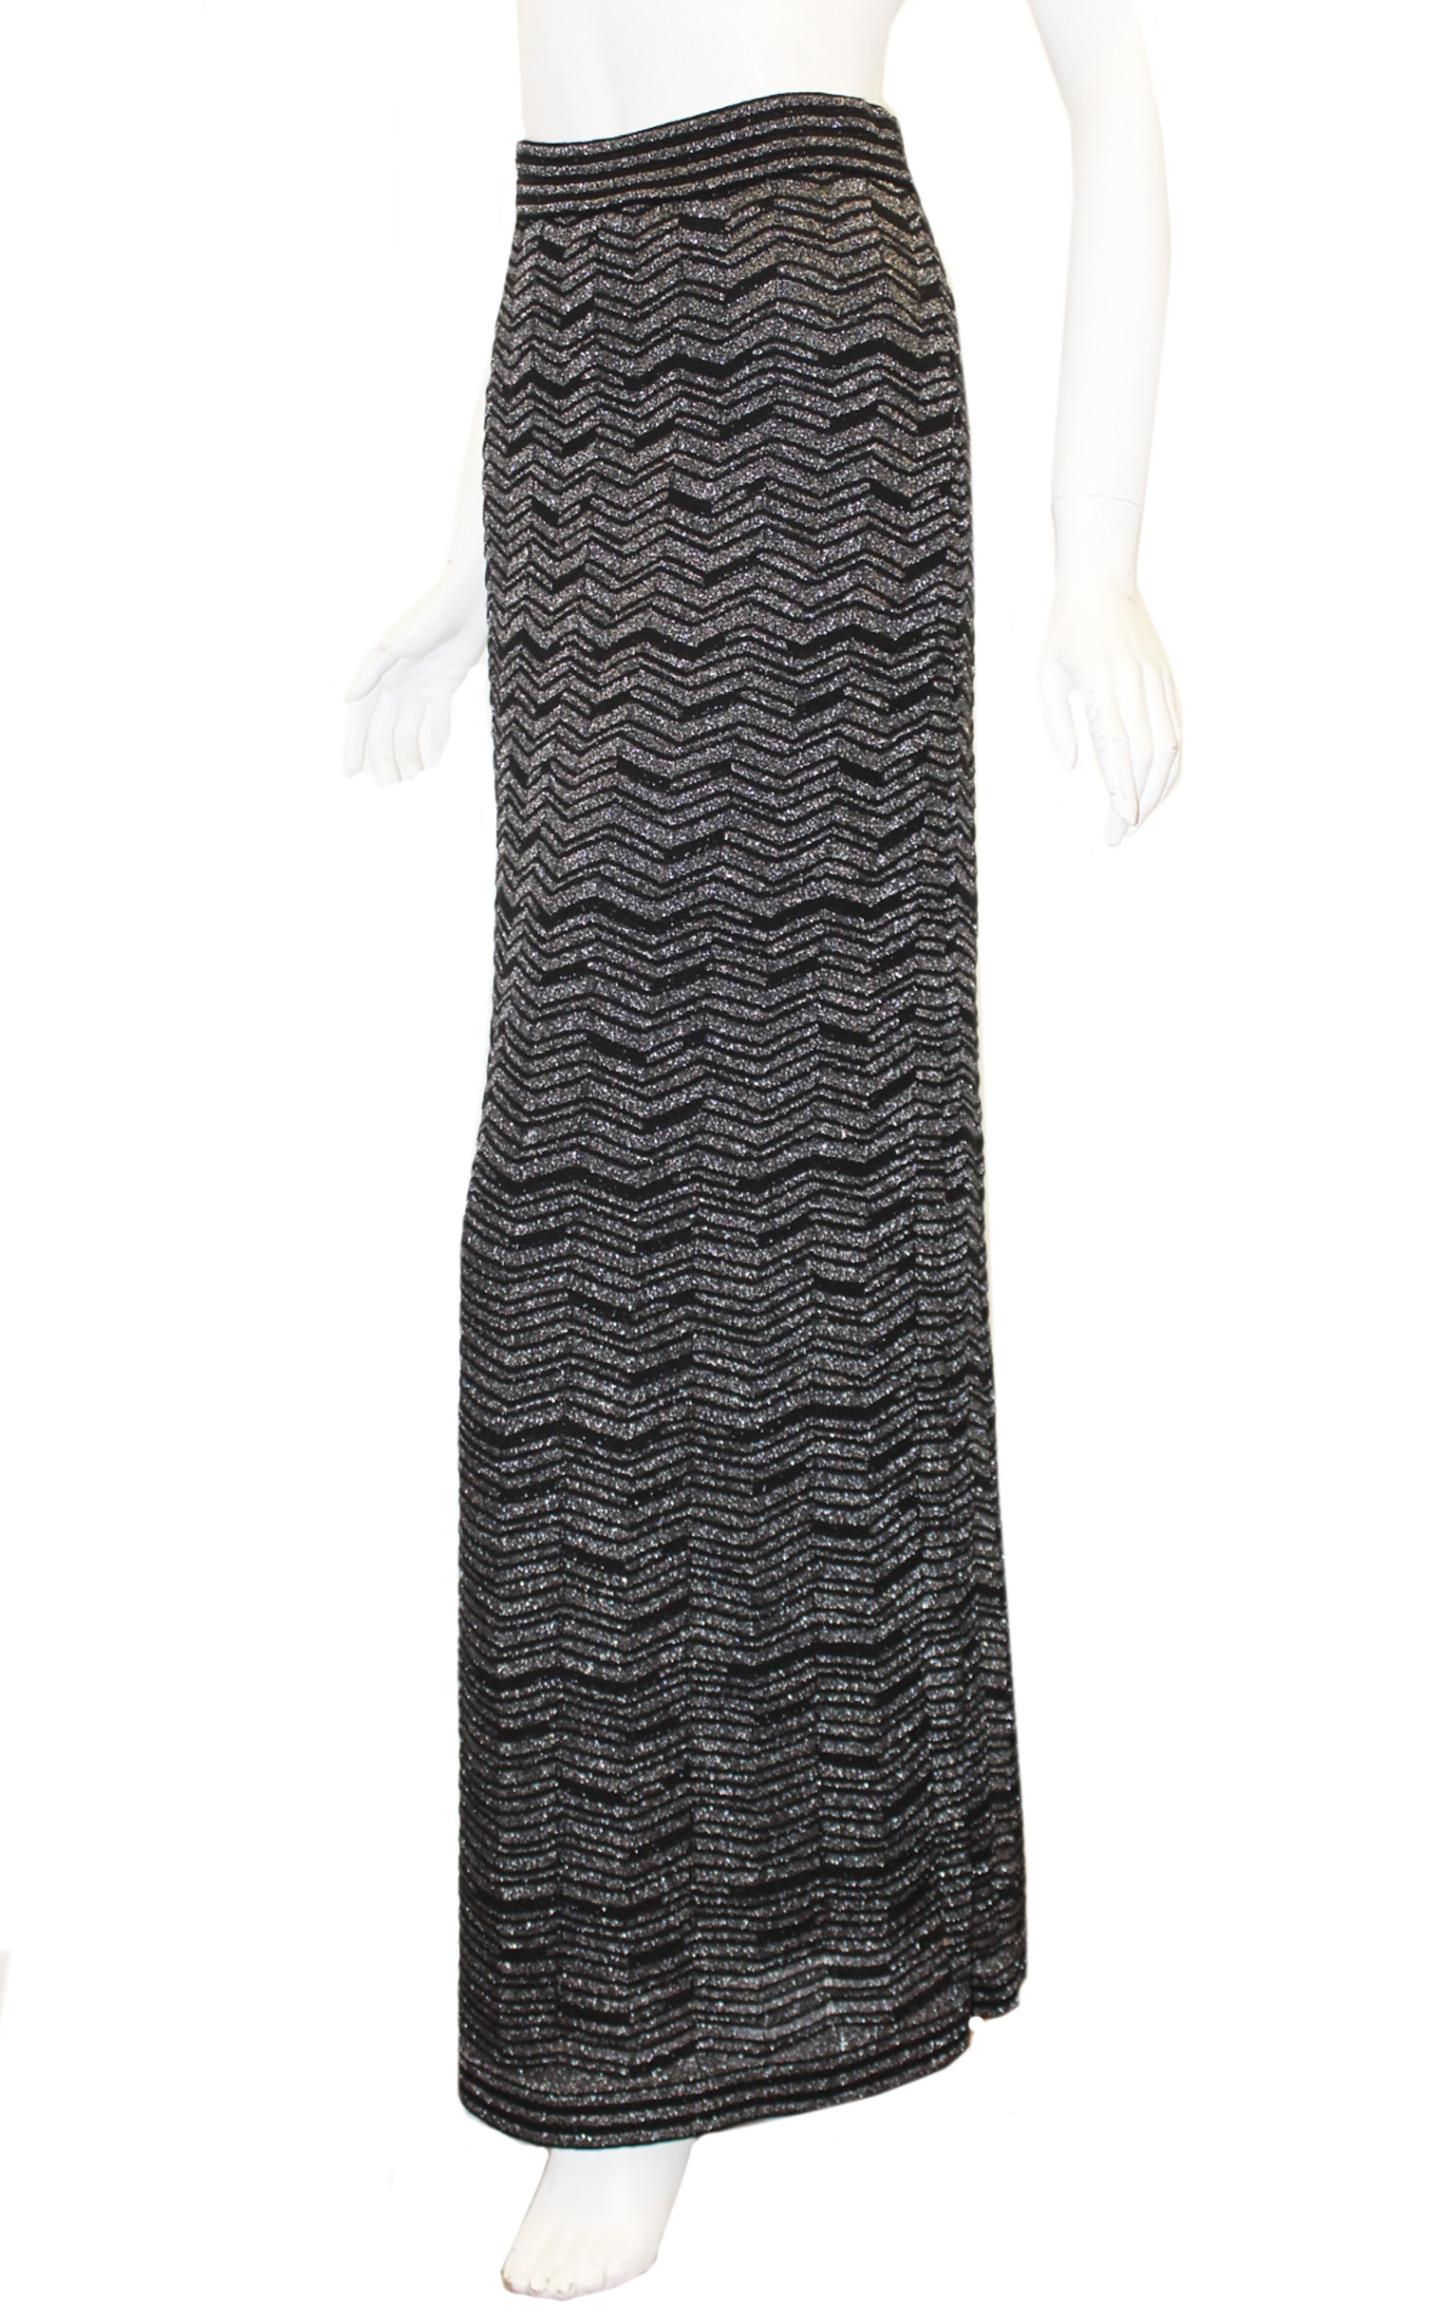 Missoni black skirt with silver tone metallic threads crocheted in the classic zig zag pattern that is the hallmark for Missoni.  This maxi skirt slips on and is cinched at waist with a concealed elastic band.  Skirt is lined in black poly fabric. 